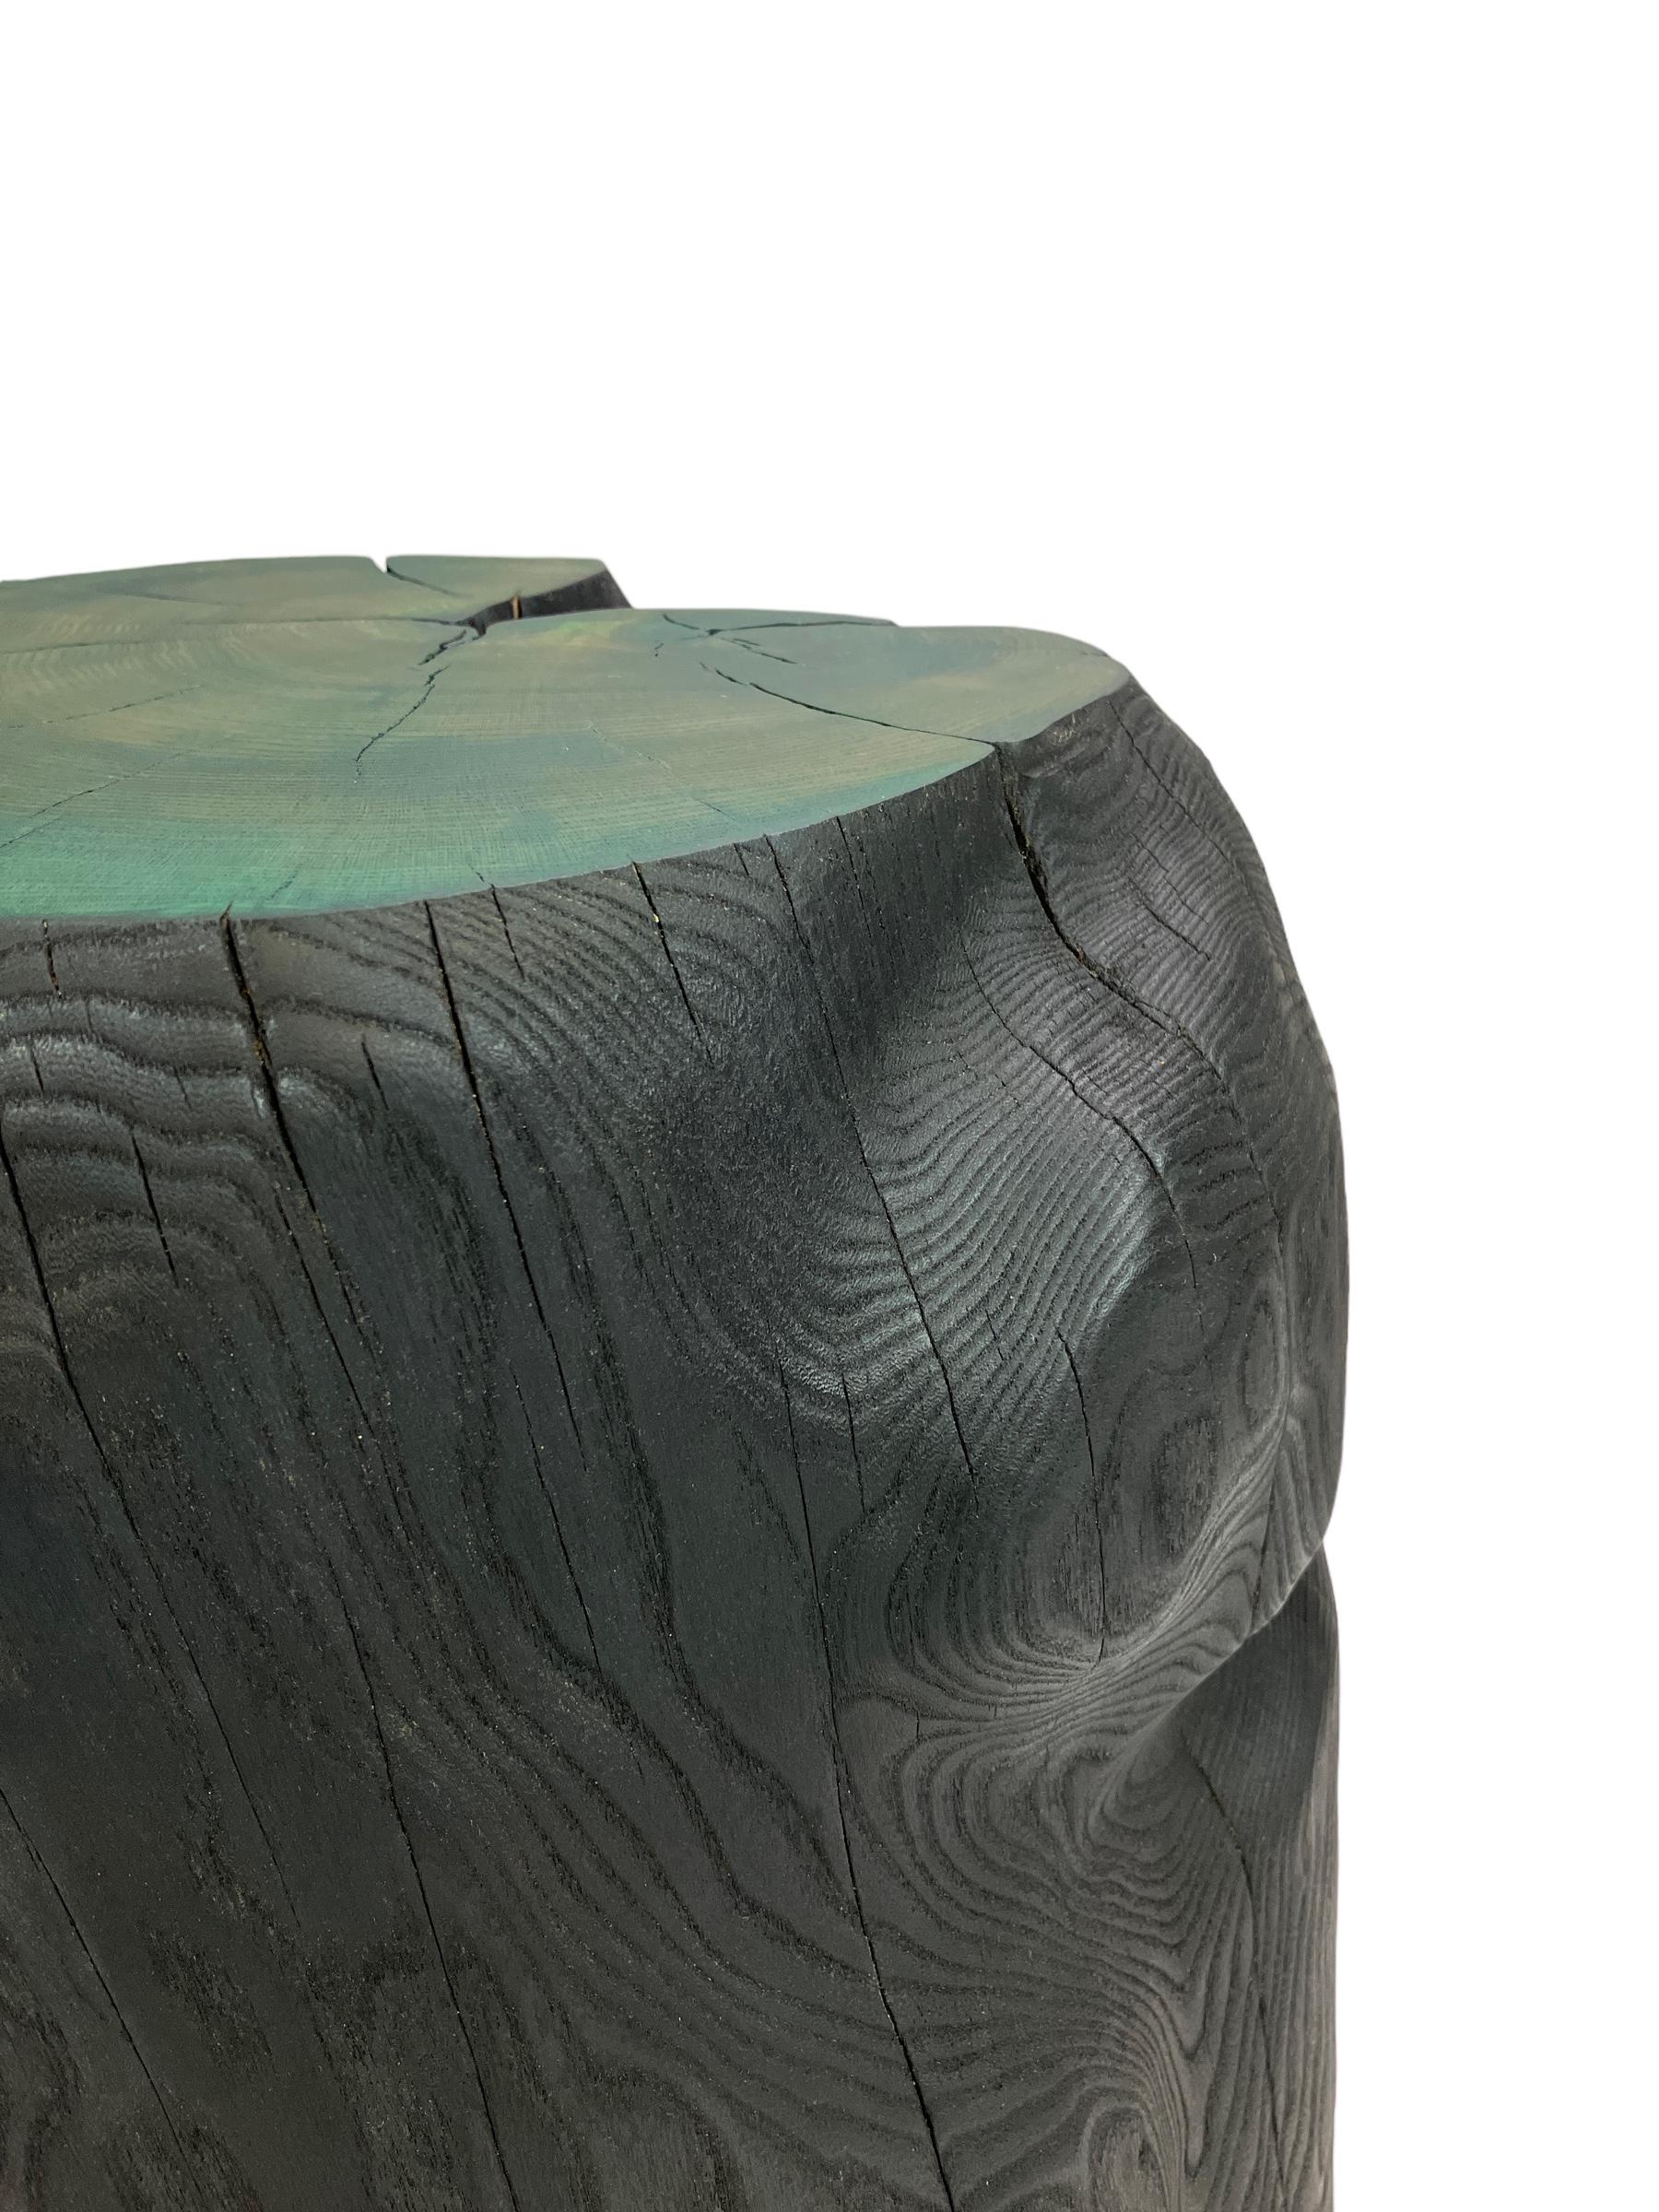 Oiled Carved sculptural wooden stool or table 